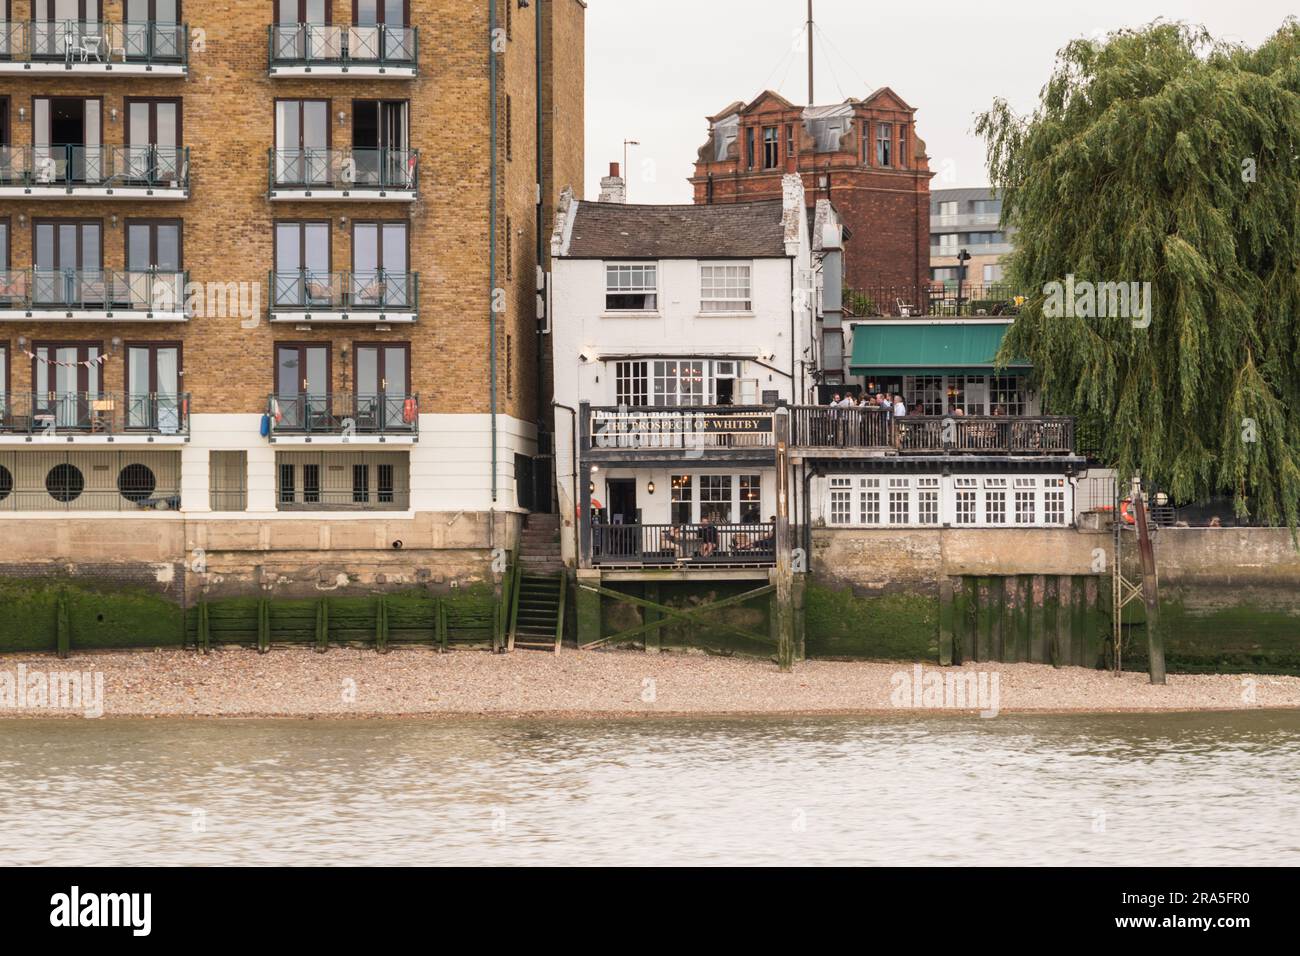 The river facing Prospect of Whitby - a historic public house on the banks of the River Thames at Wapping, Tower Hamlets, London, E1, England, U.K. Stock Photo